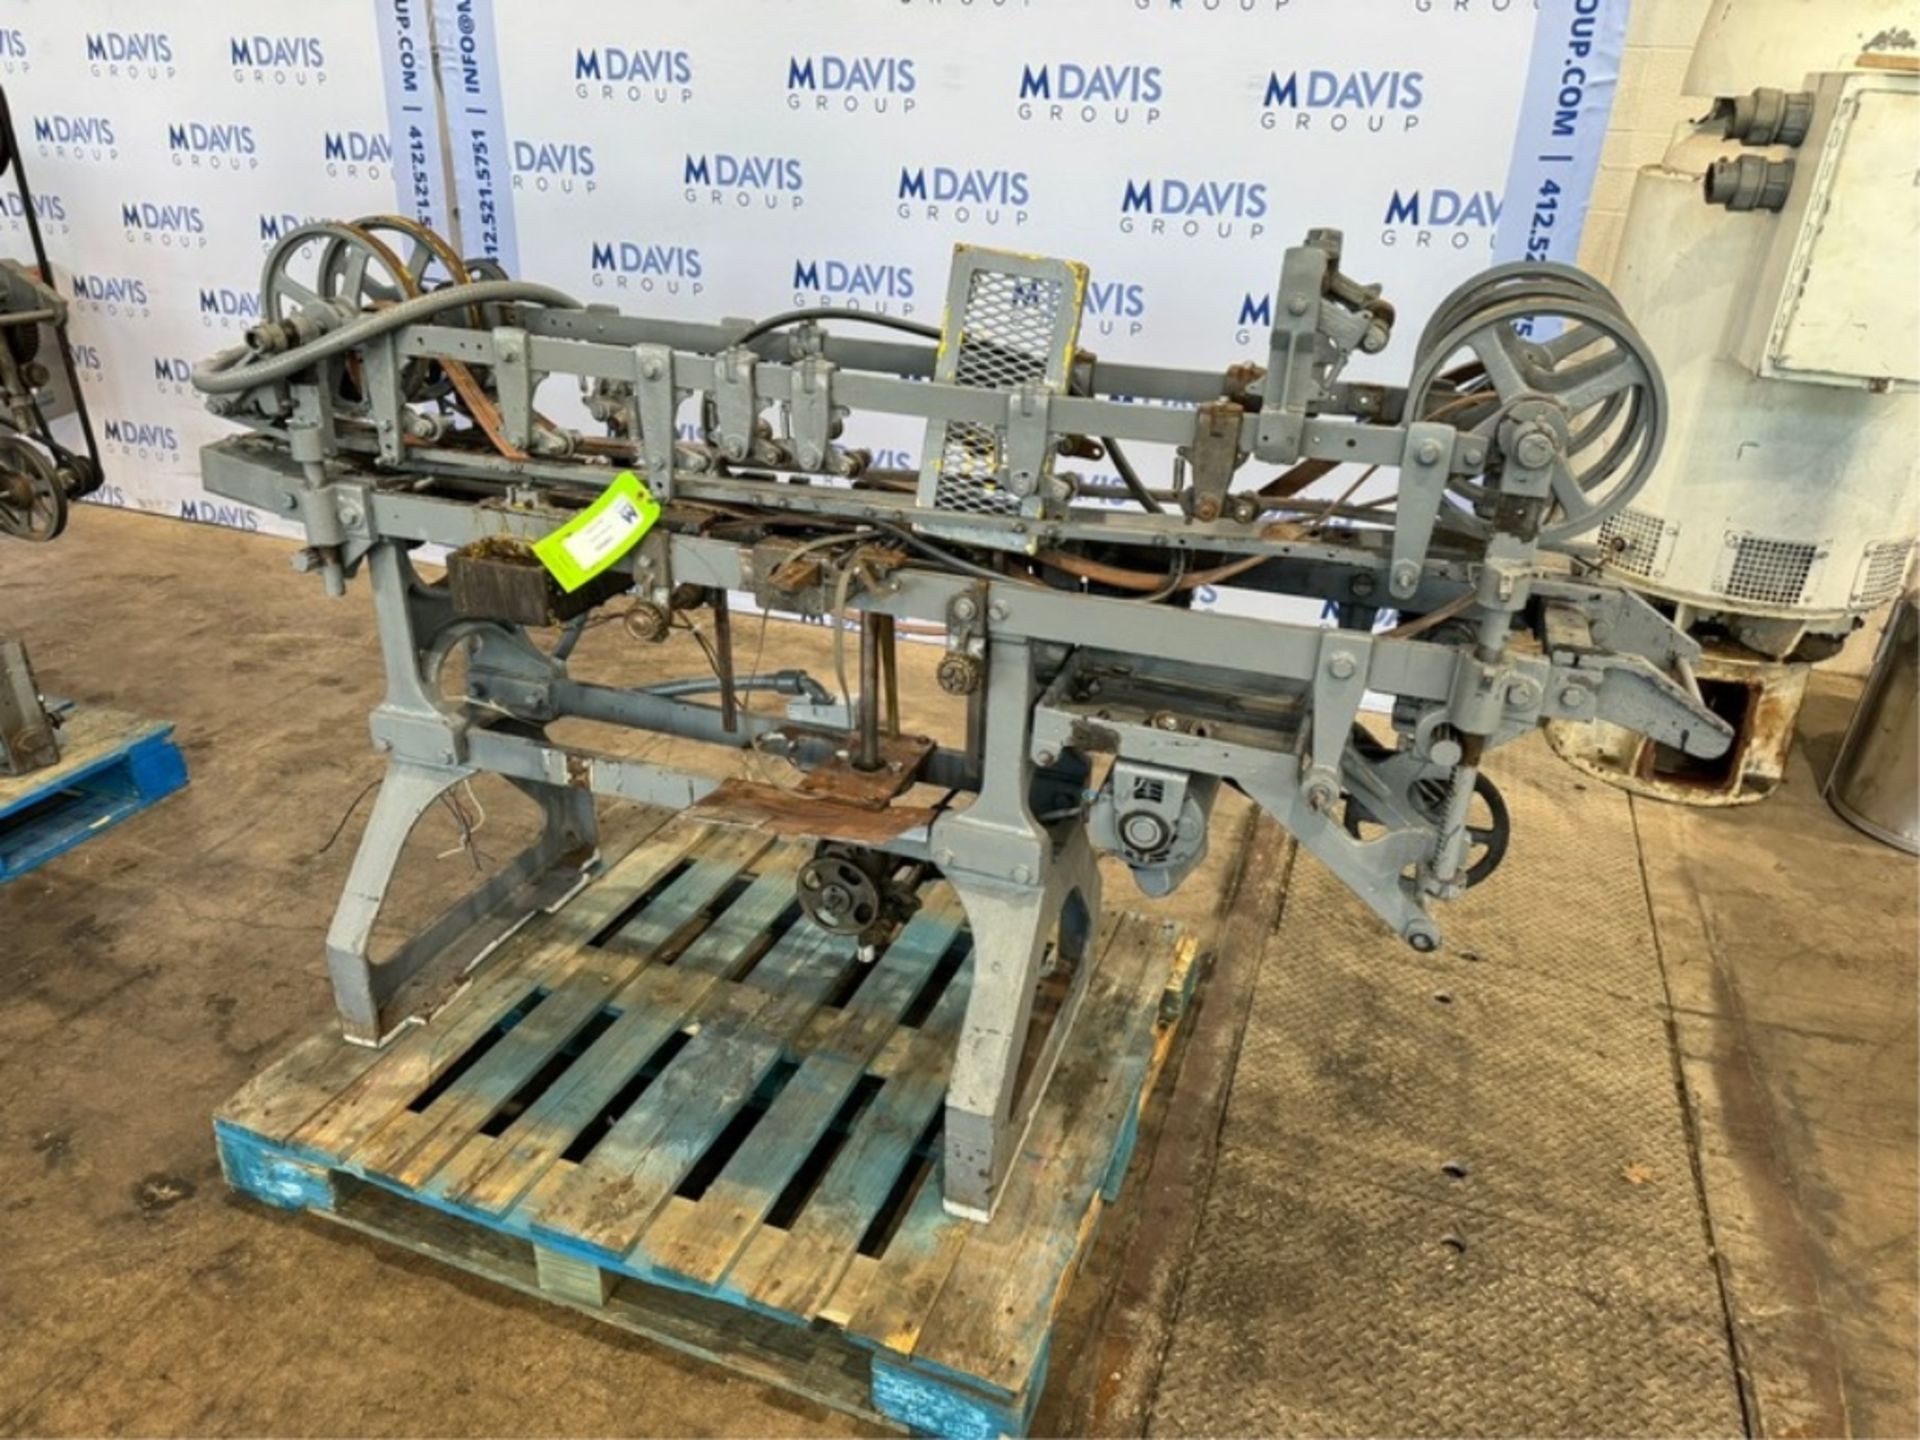 Burt Machinery Co. Marker, Mounted on Mild Steel Frame (INV#104025) (Located @ the MDG Auction